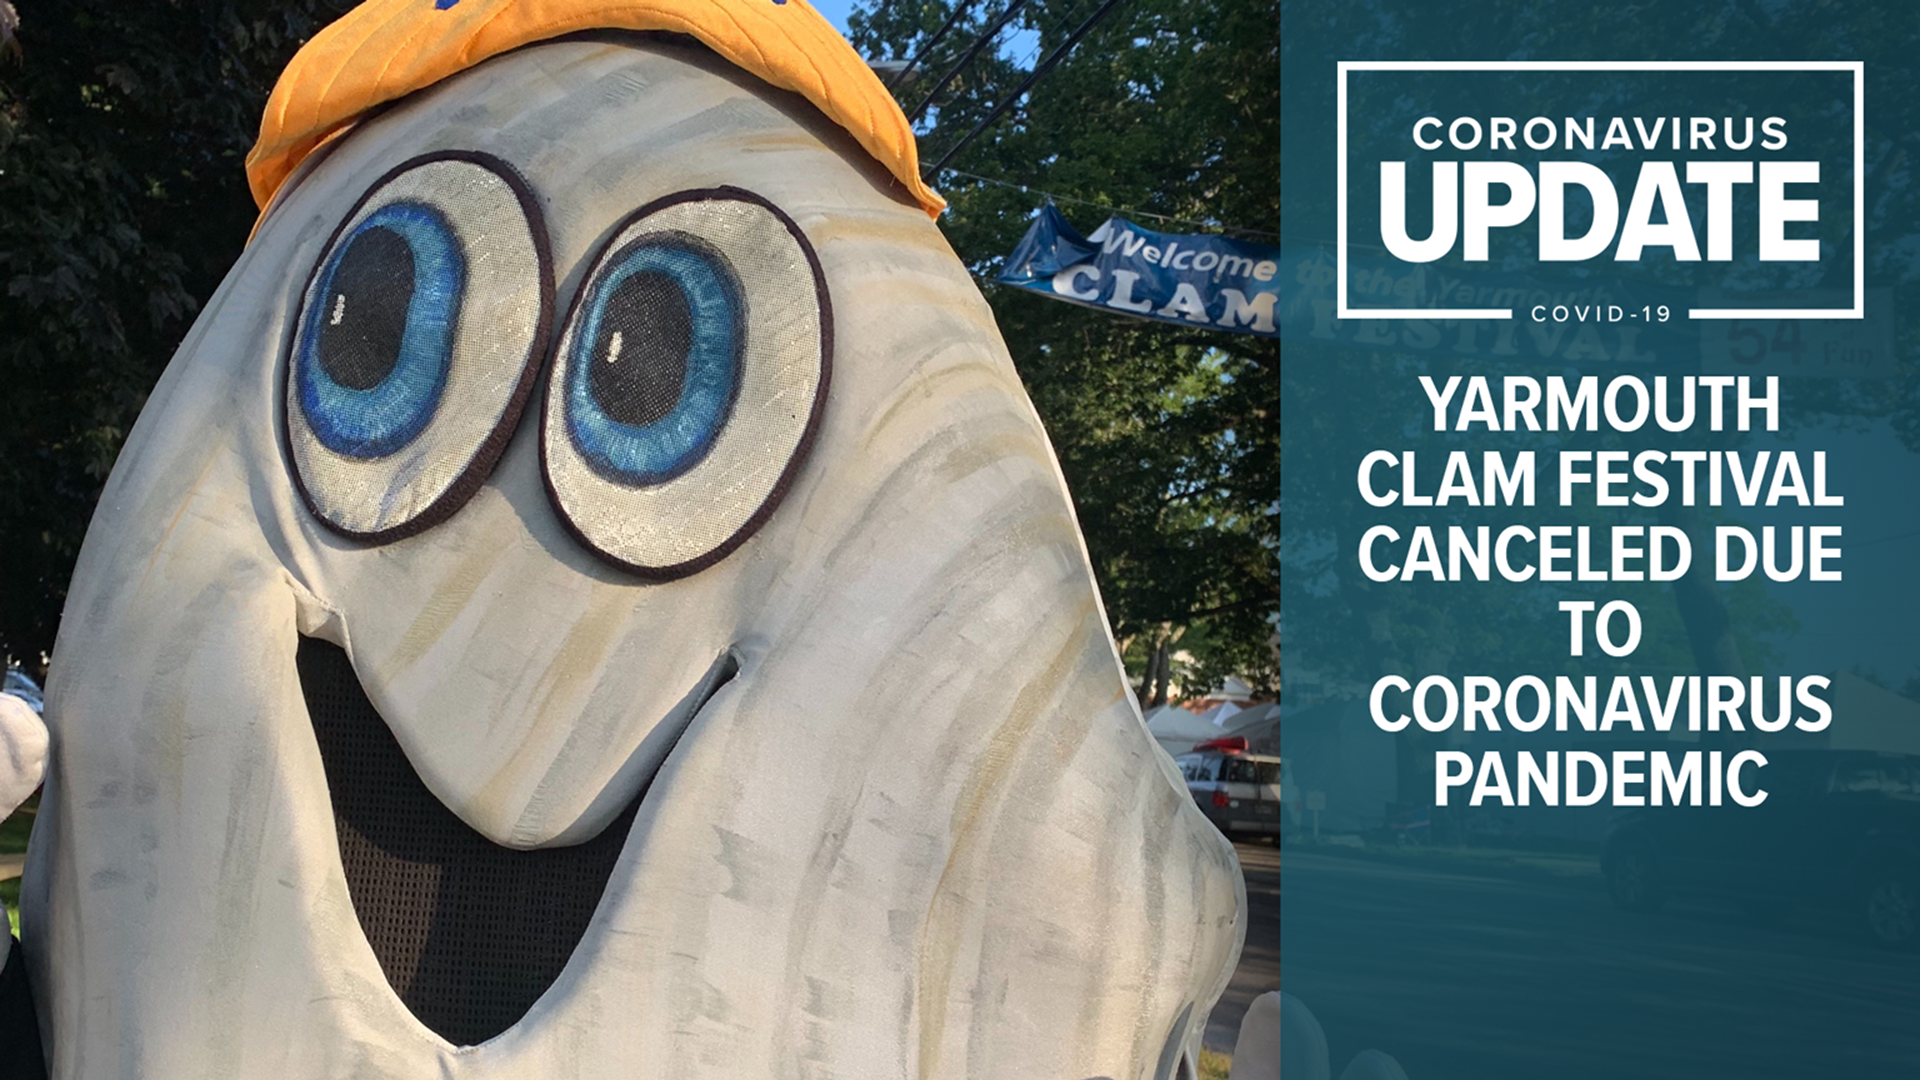 Yarmouth Clam Festival canceled for second year due to COVID-19